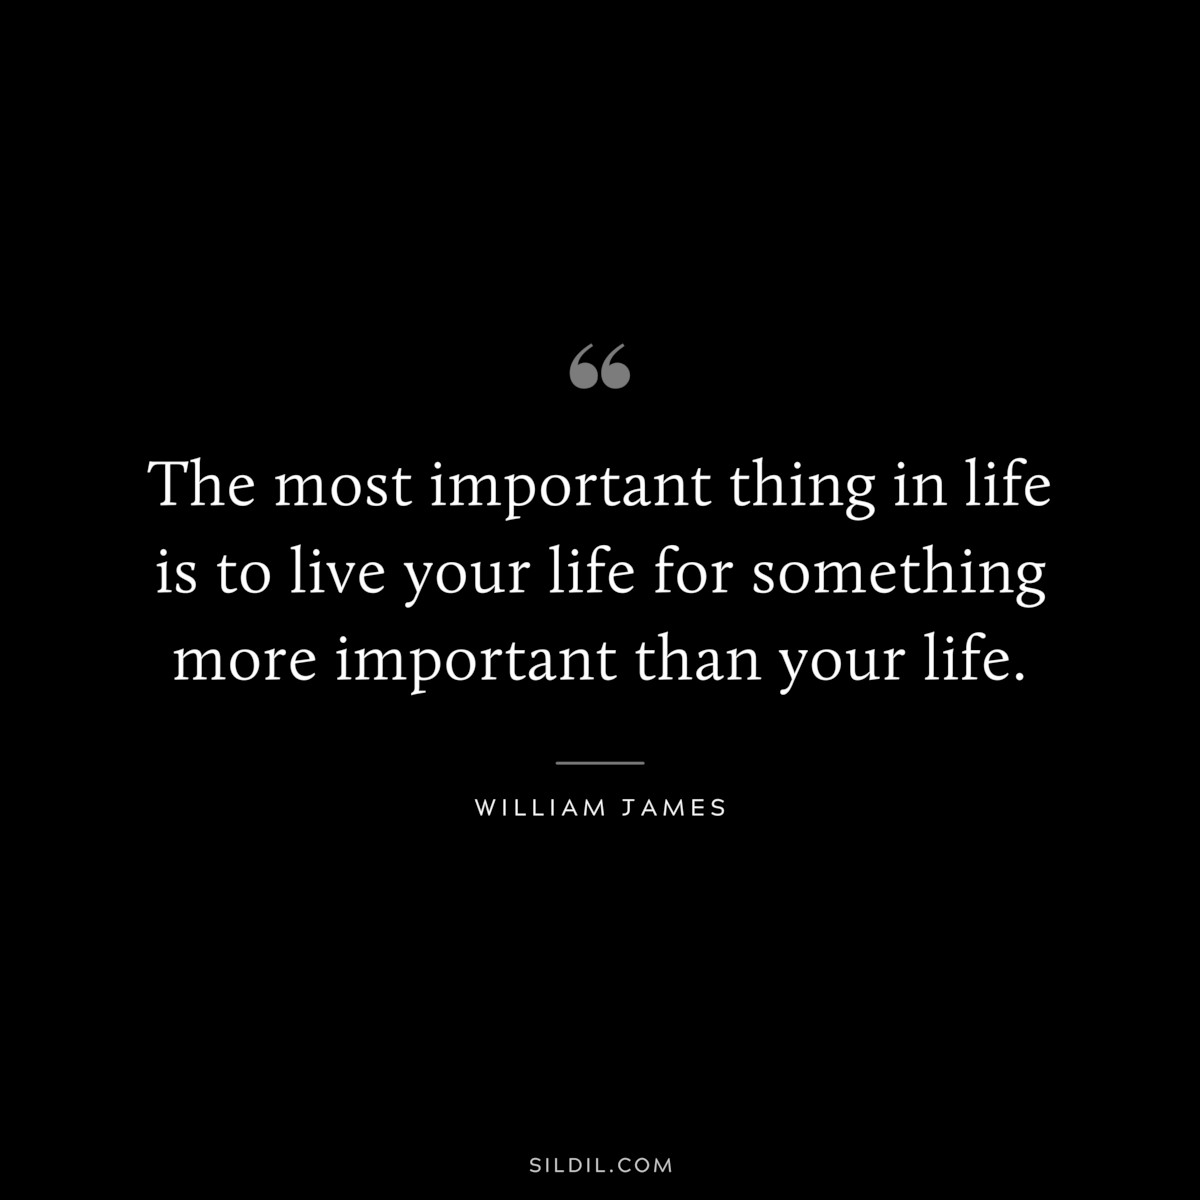 The most important thing in life is to live your life for something more important than your life. ― William James